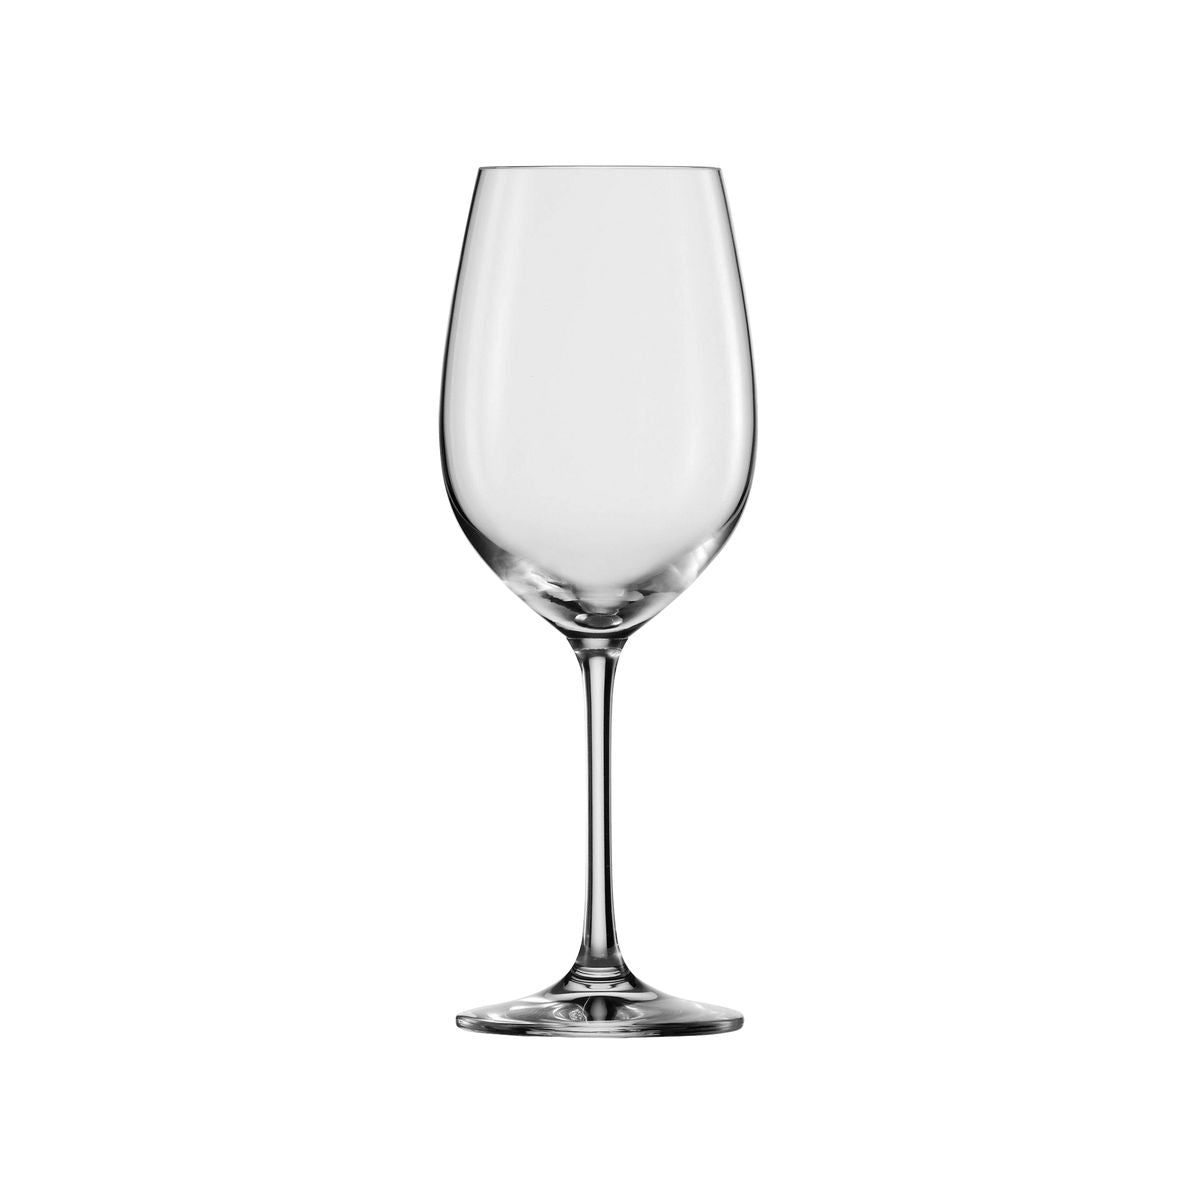 Riesling Glass - 360Ml, Ivento from Schott Zwiesel. made out of Glass and sold in boxes of 6. Hospitality quality at wholesale price with The Flying Fork! 